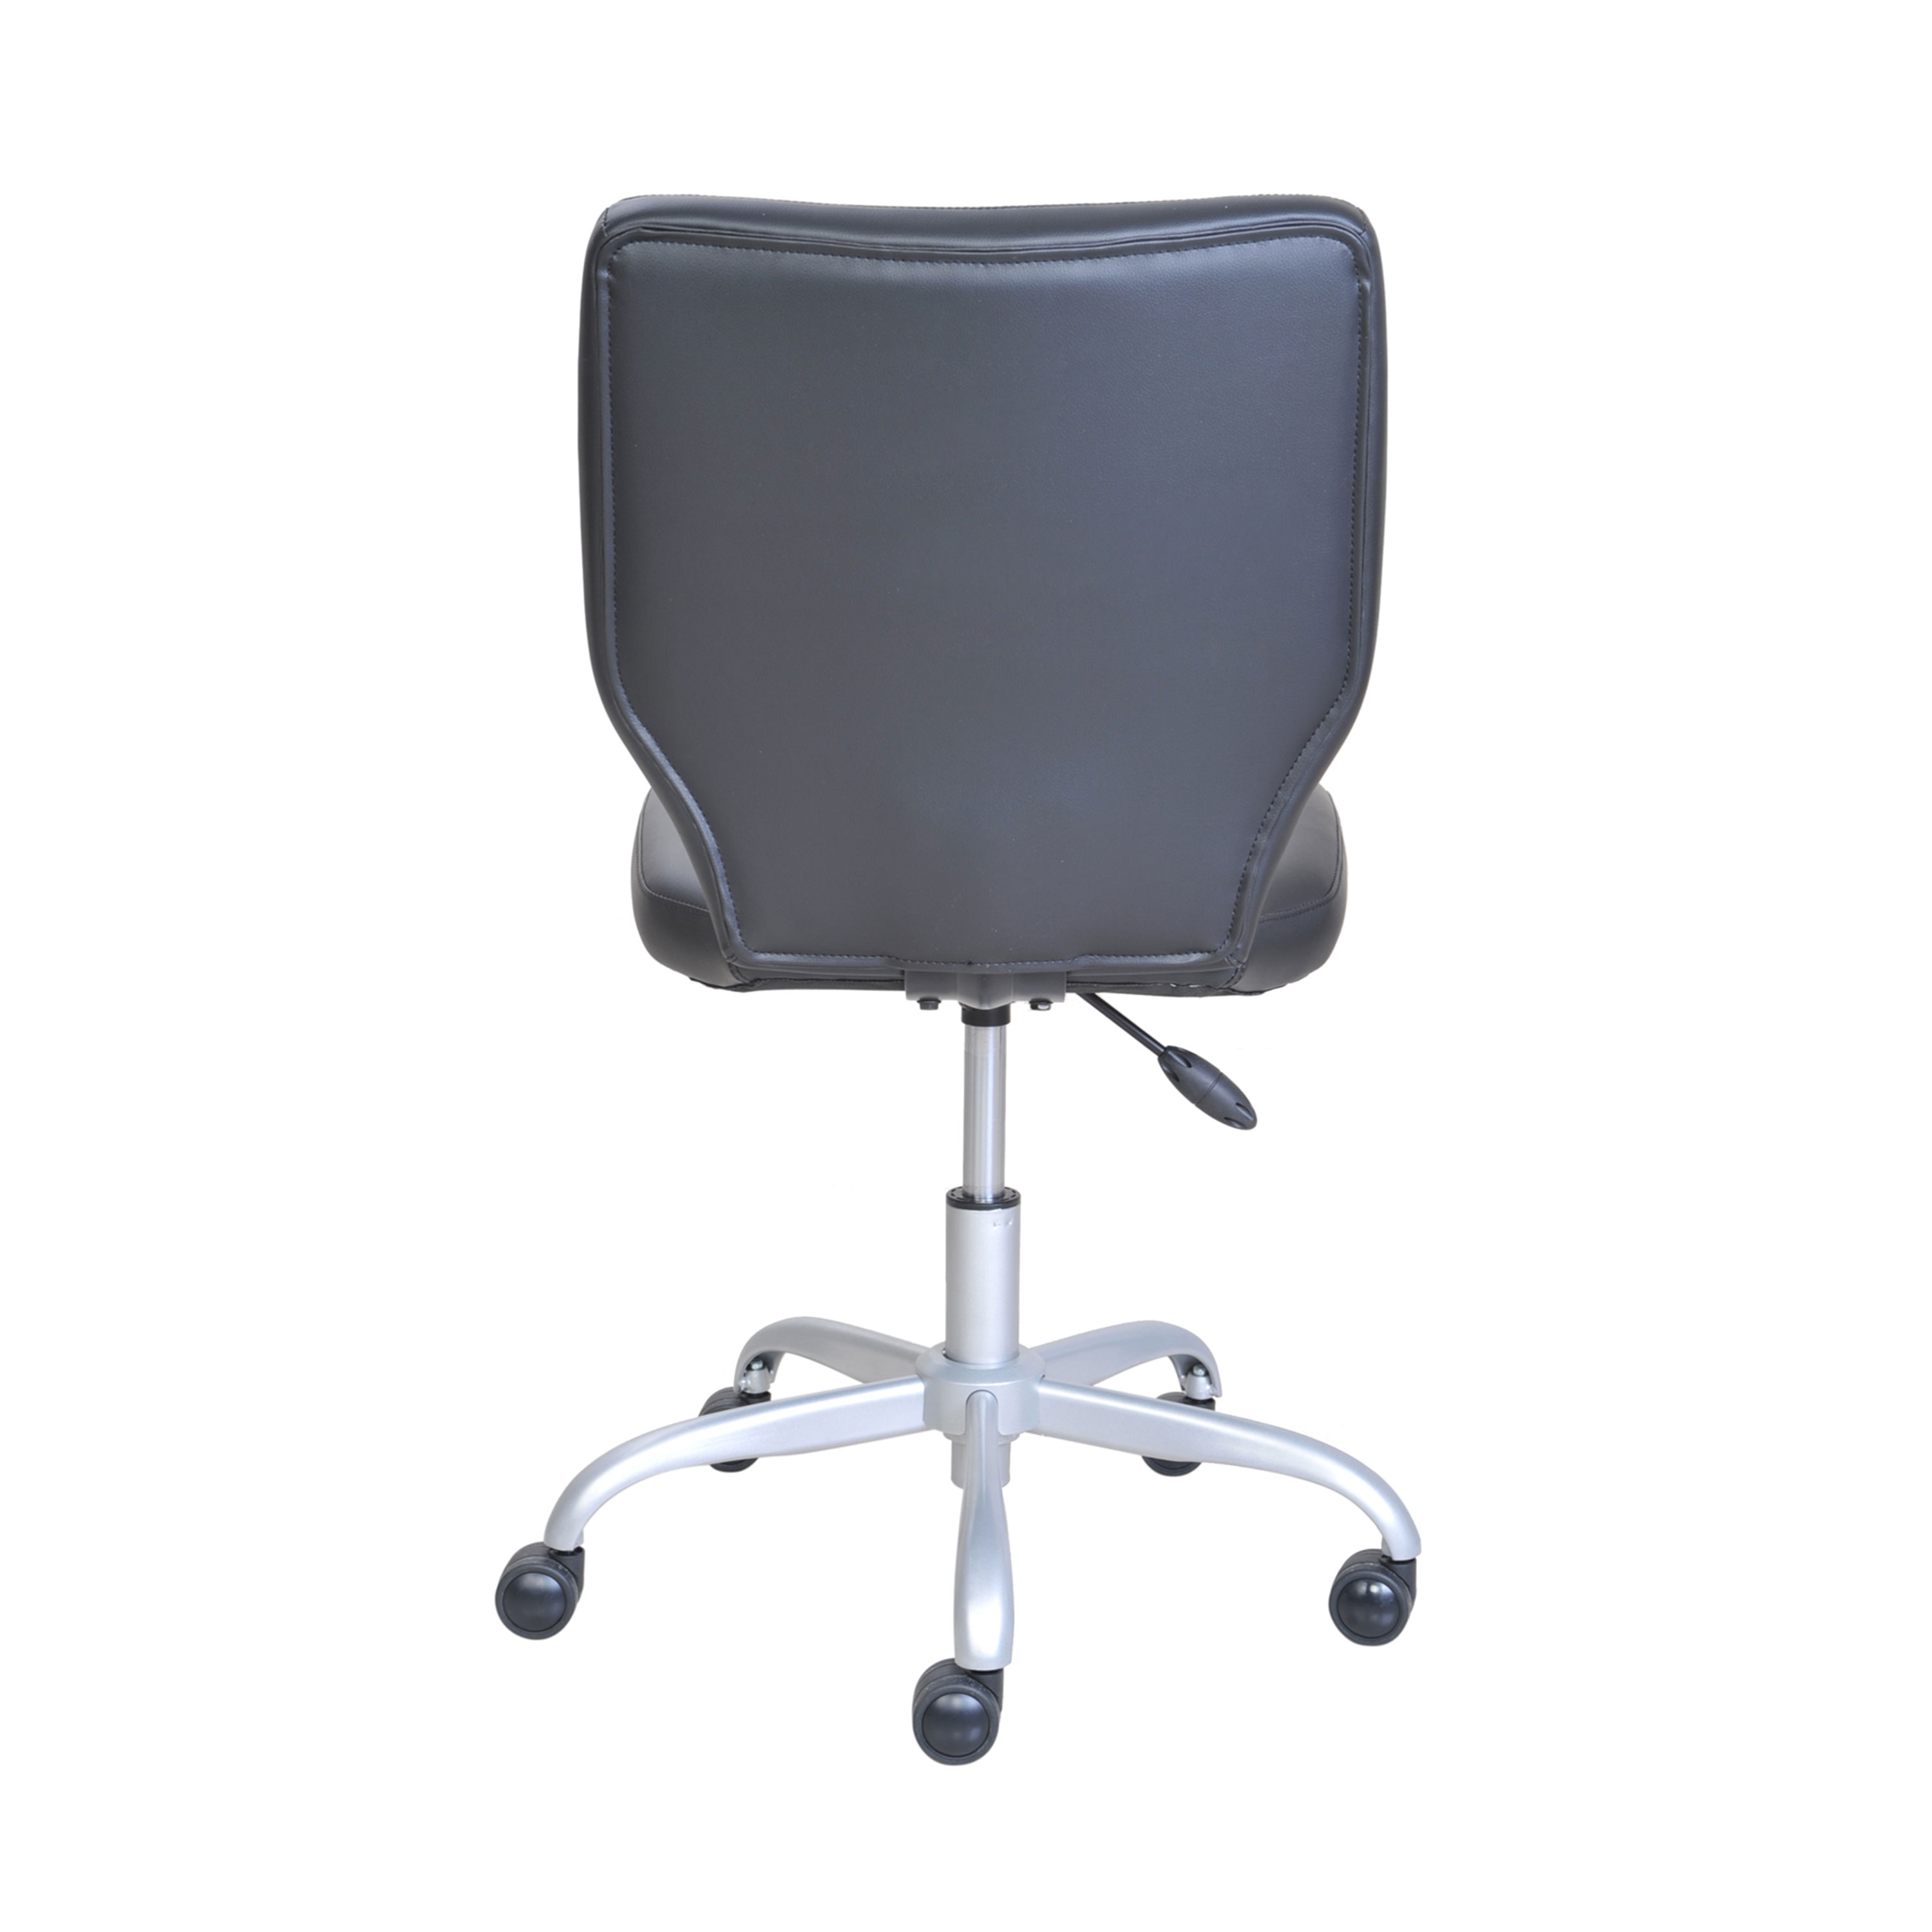 Mainstays Mid-Back Office Chair with Matching Color Casters, Gray Faux Leather - image 4 of 6